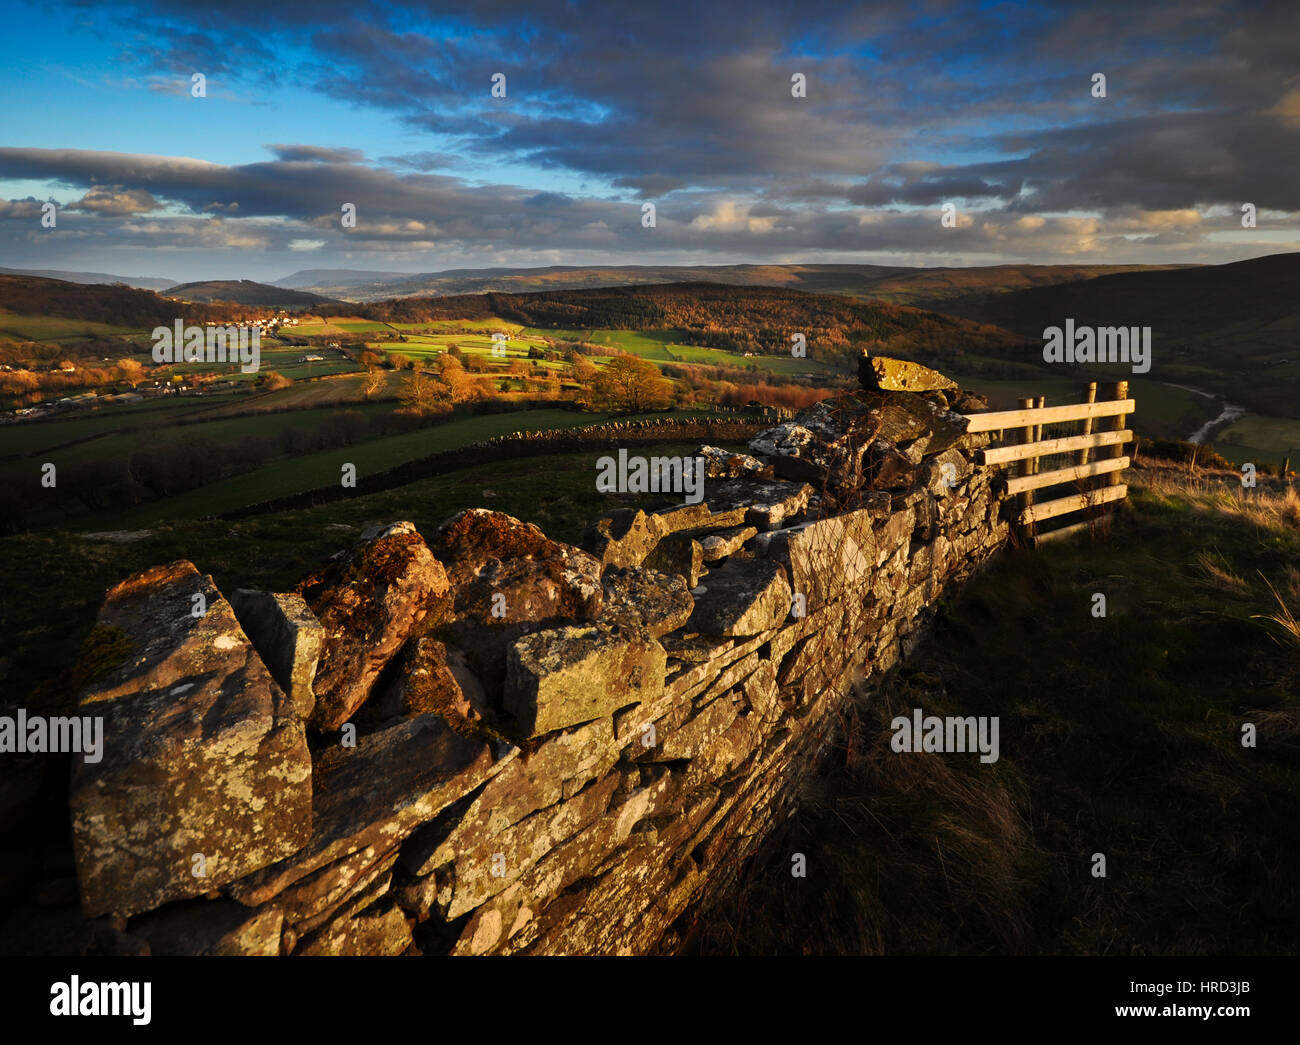 A view over the Black Mountains from Allt yr Ysgair, Brecon Beacons National Park, Wales, United Kingdom Stock Photo